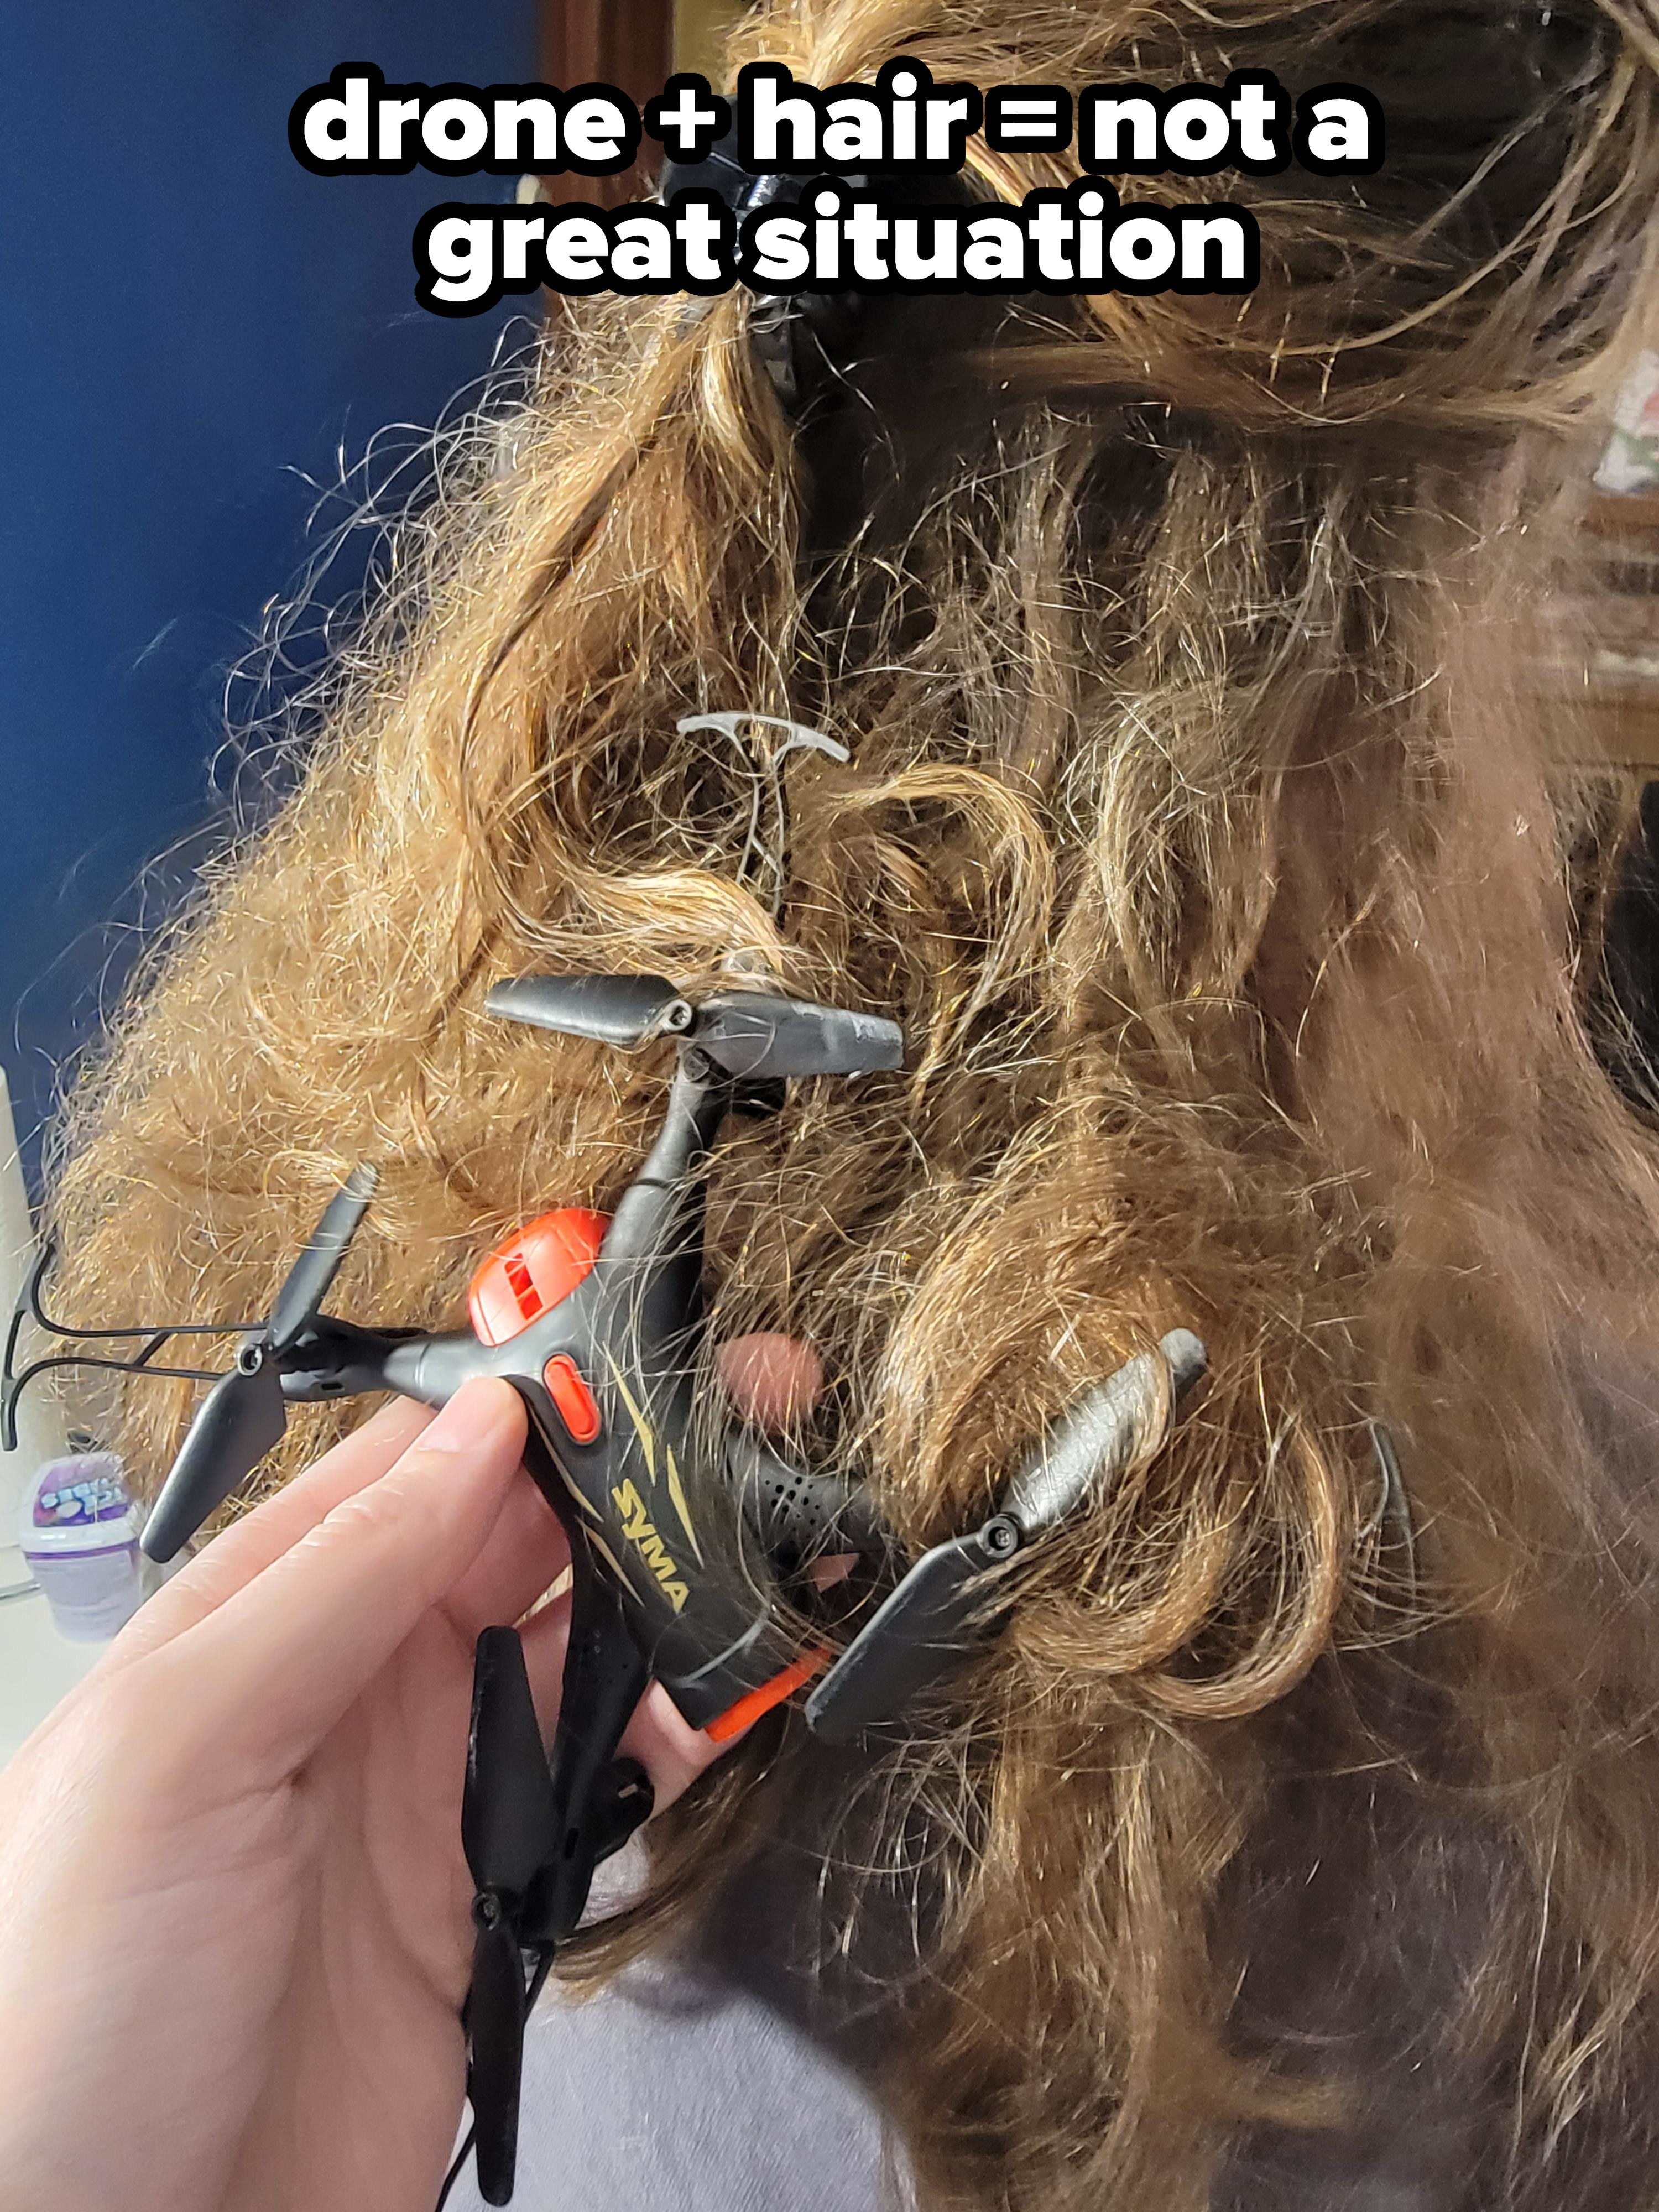 A small drone tangled up in long hair